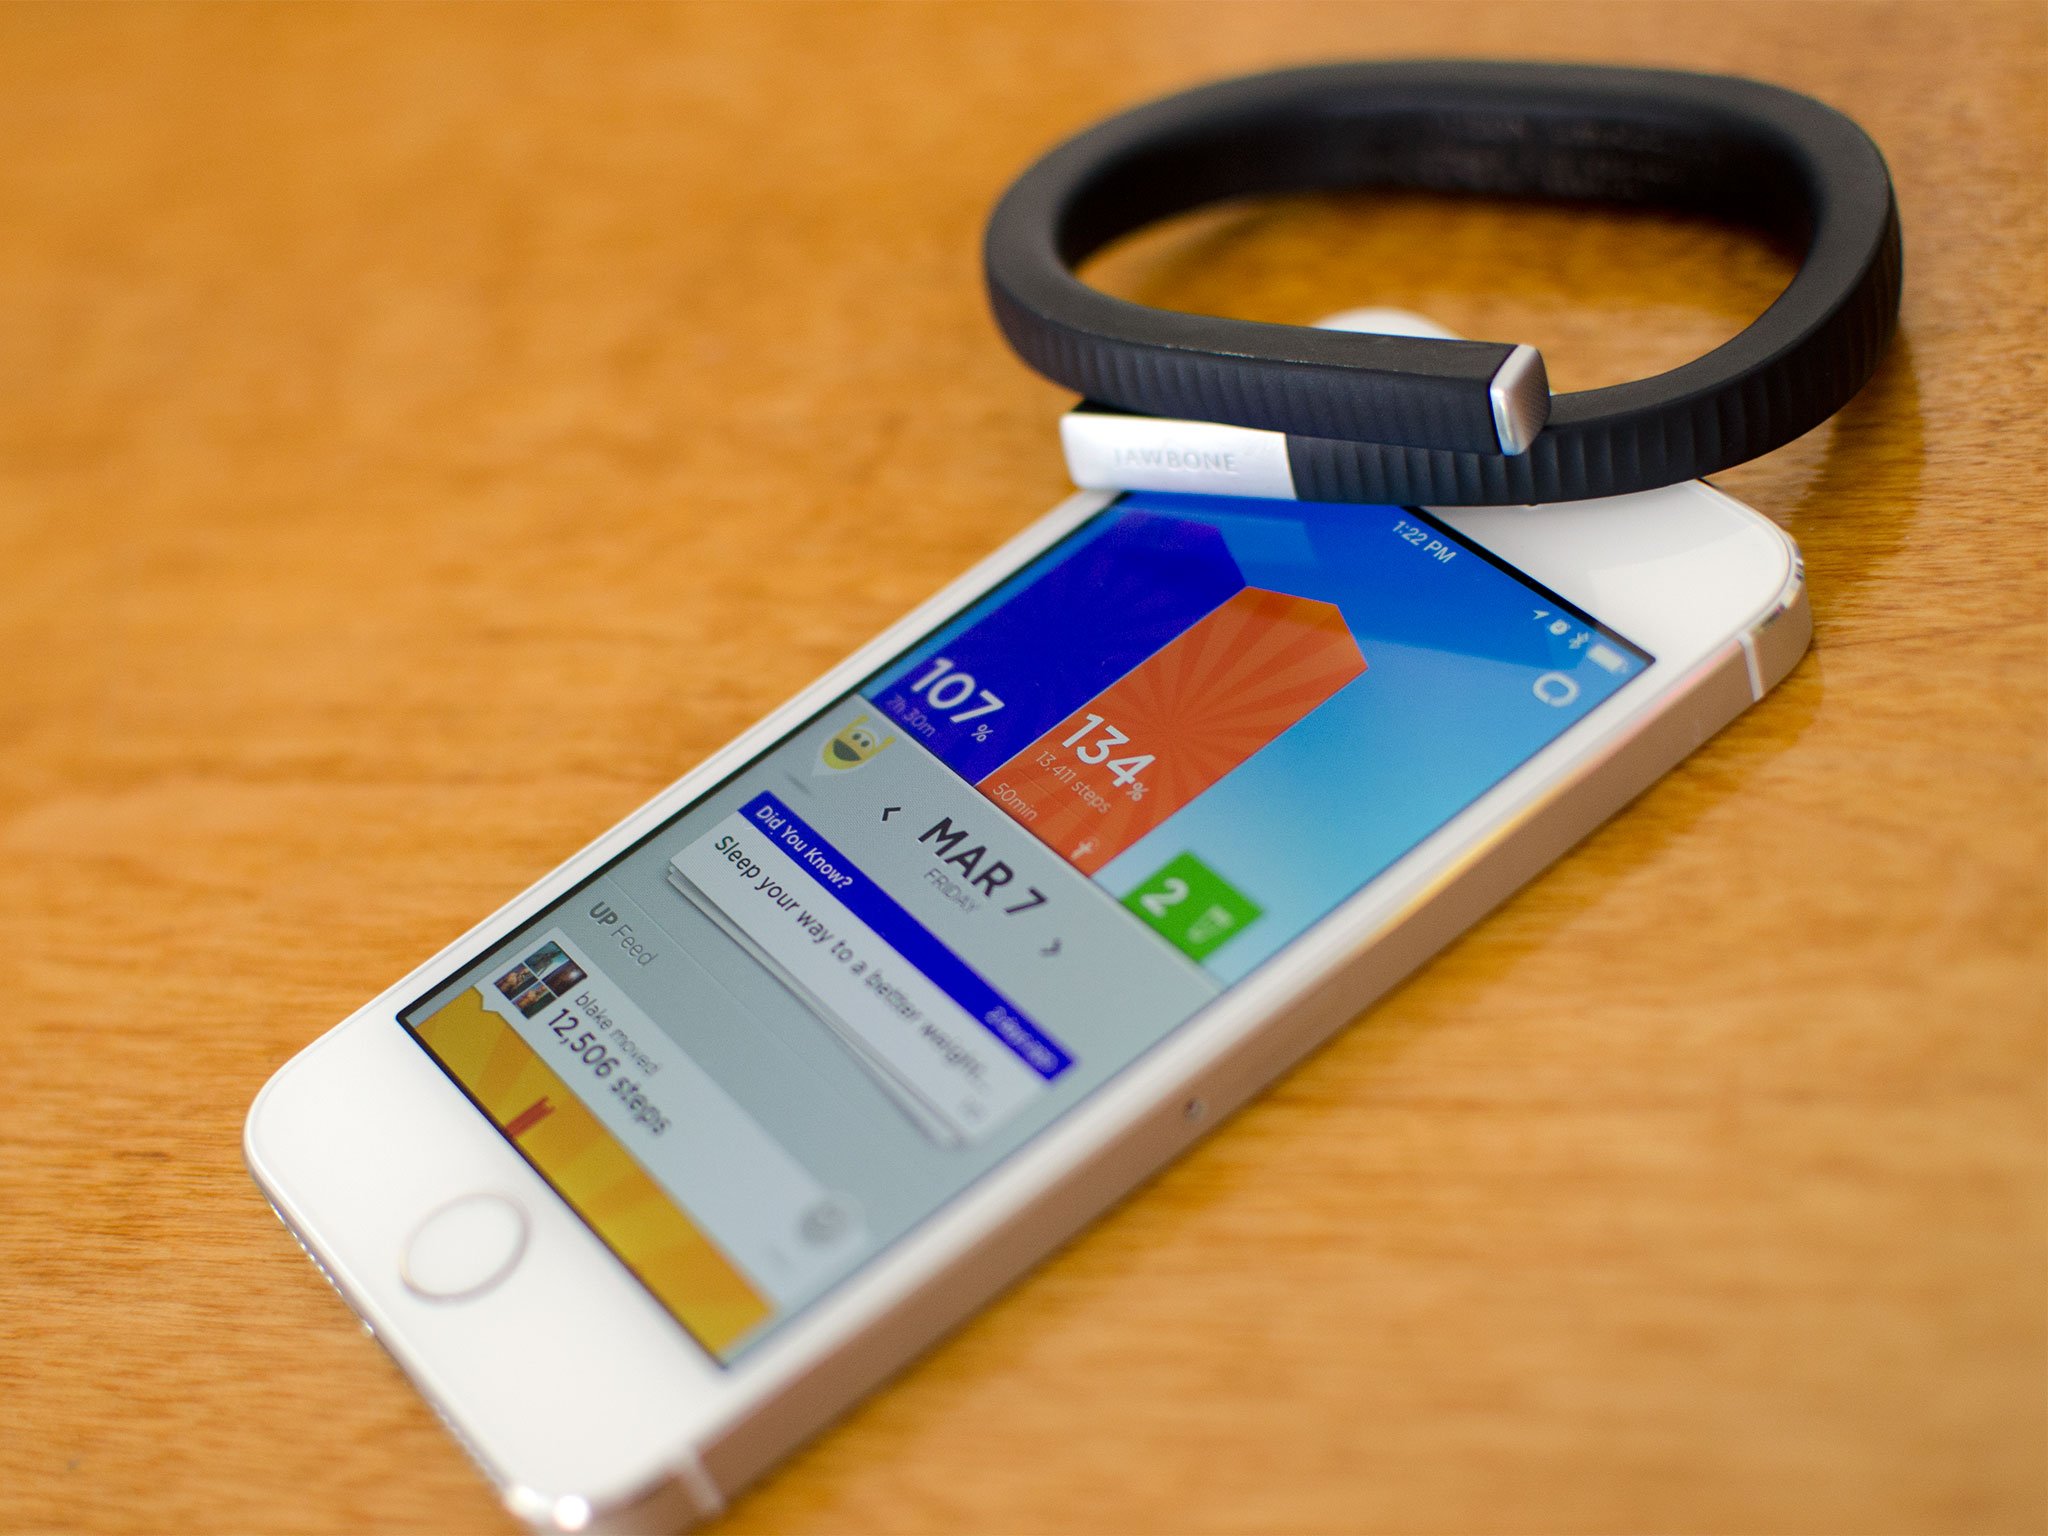 UP24 by Jawbone review